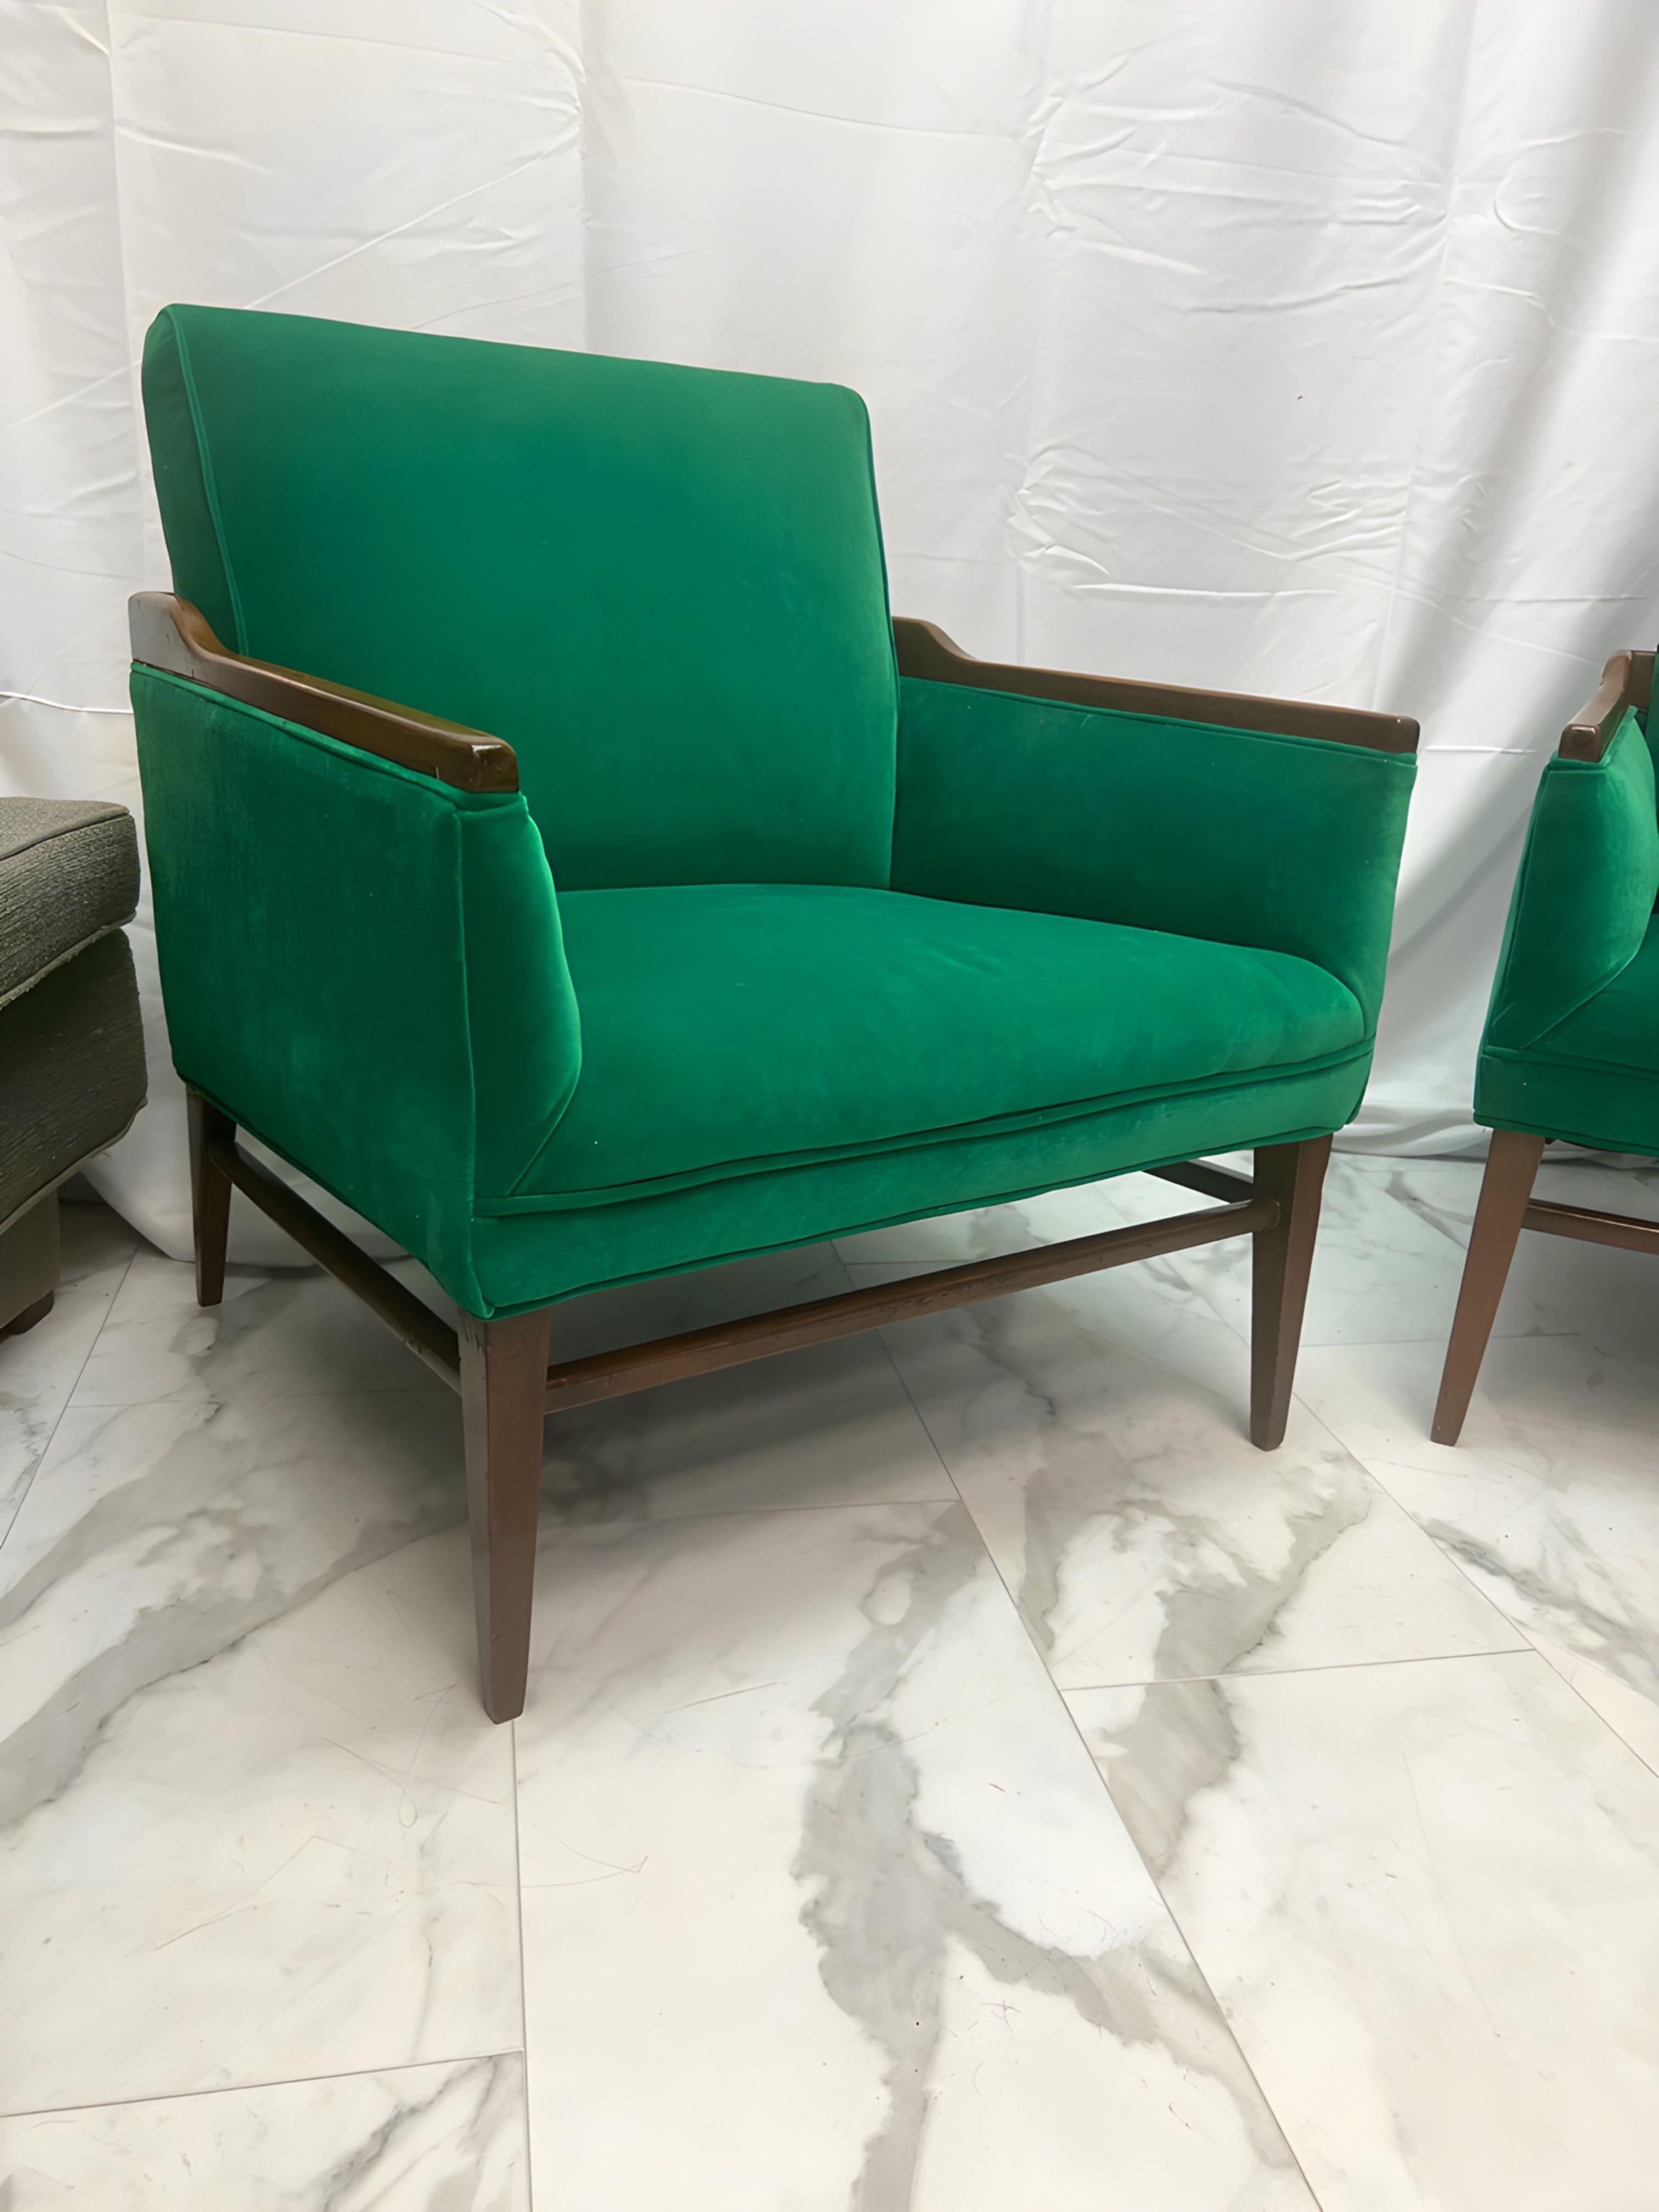 American 1950’s Walnut and Green Velvet Low Profile Chairs - a Pair For Sale